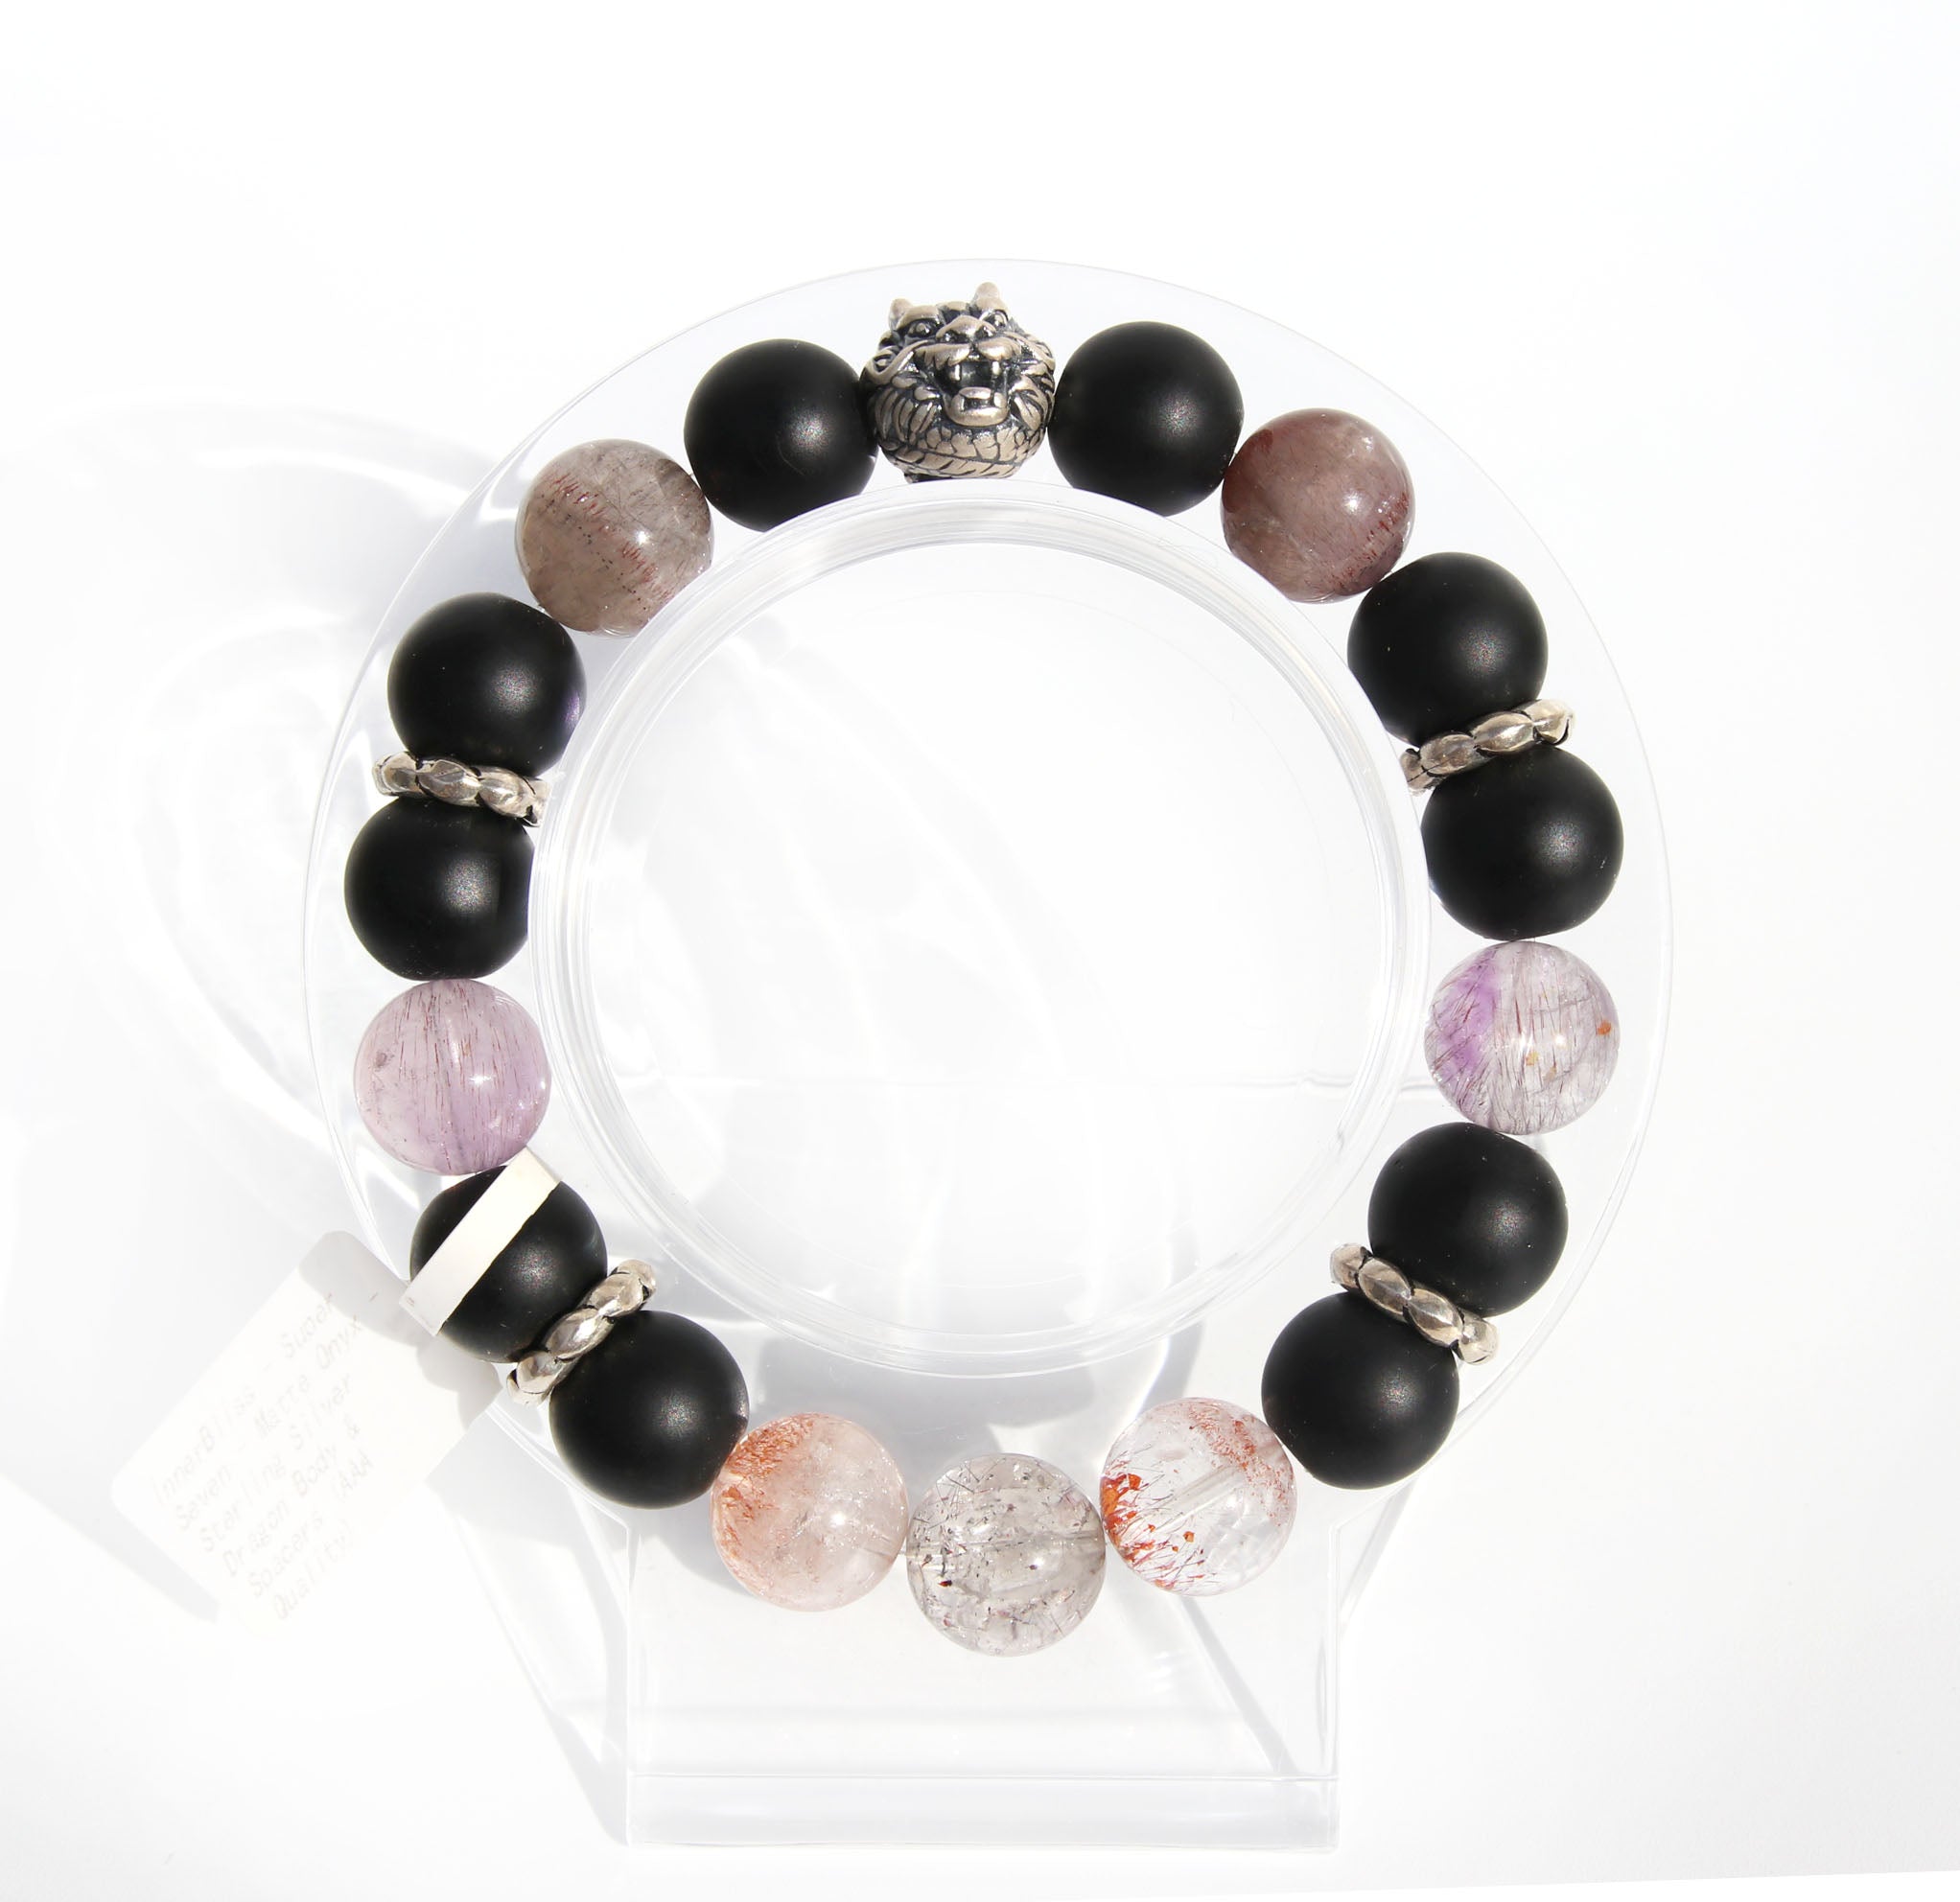 Super Seven | Matte Onyx | Sterling Silver Dragon & Spacer Beads